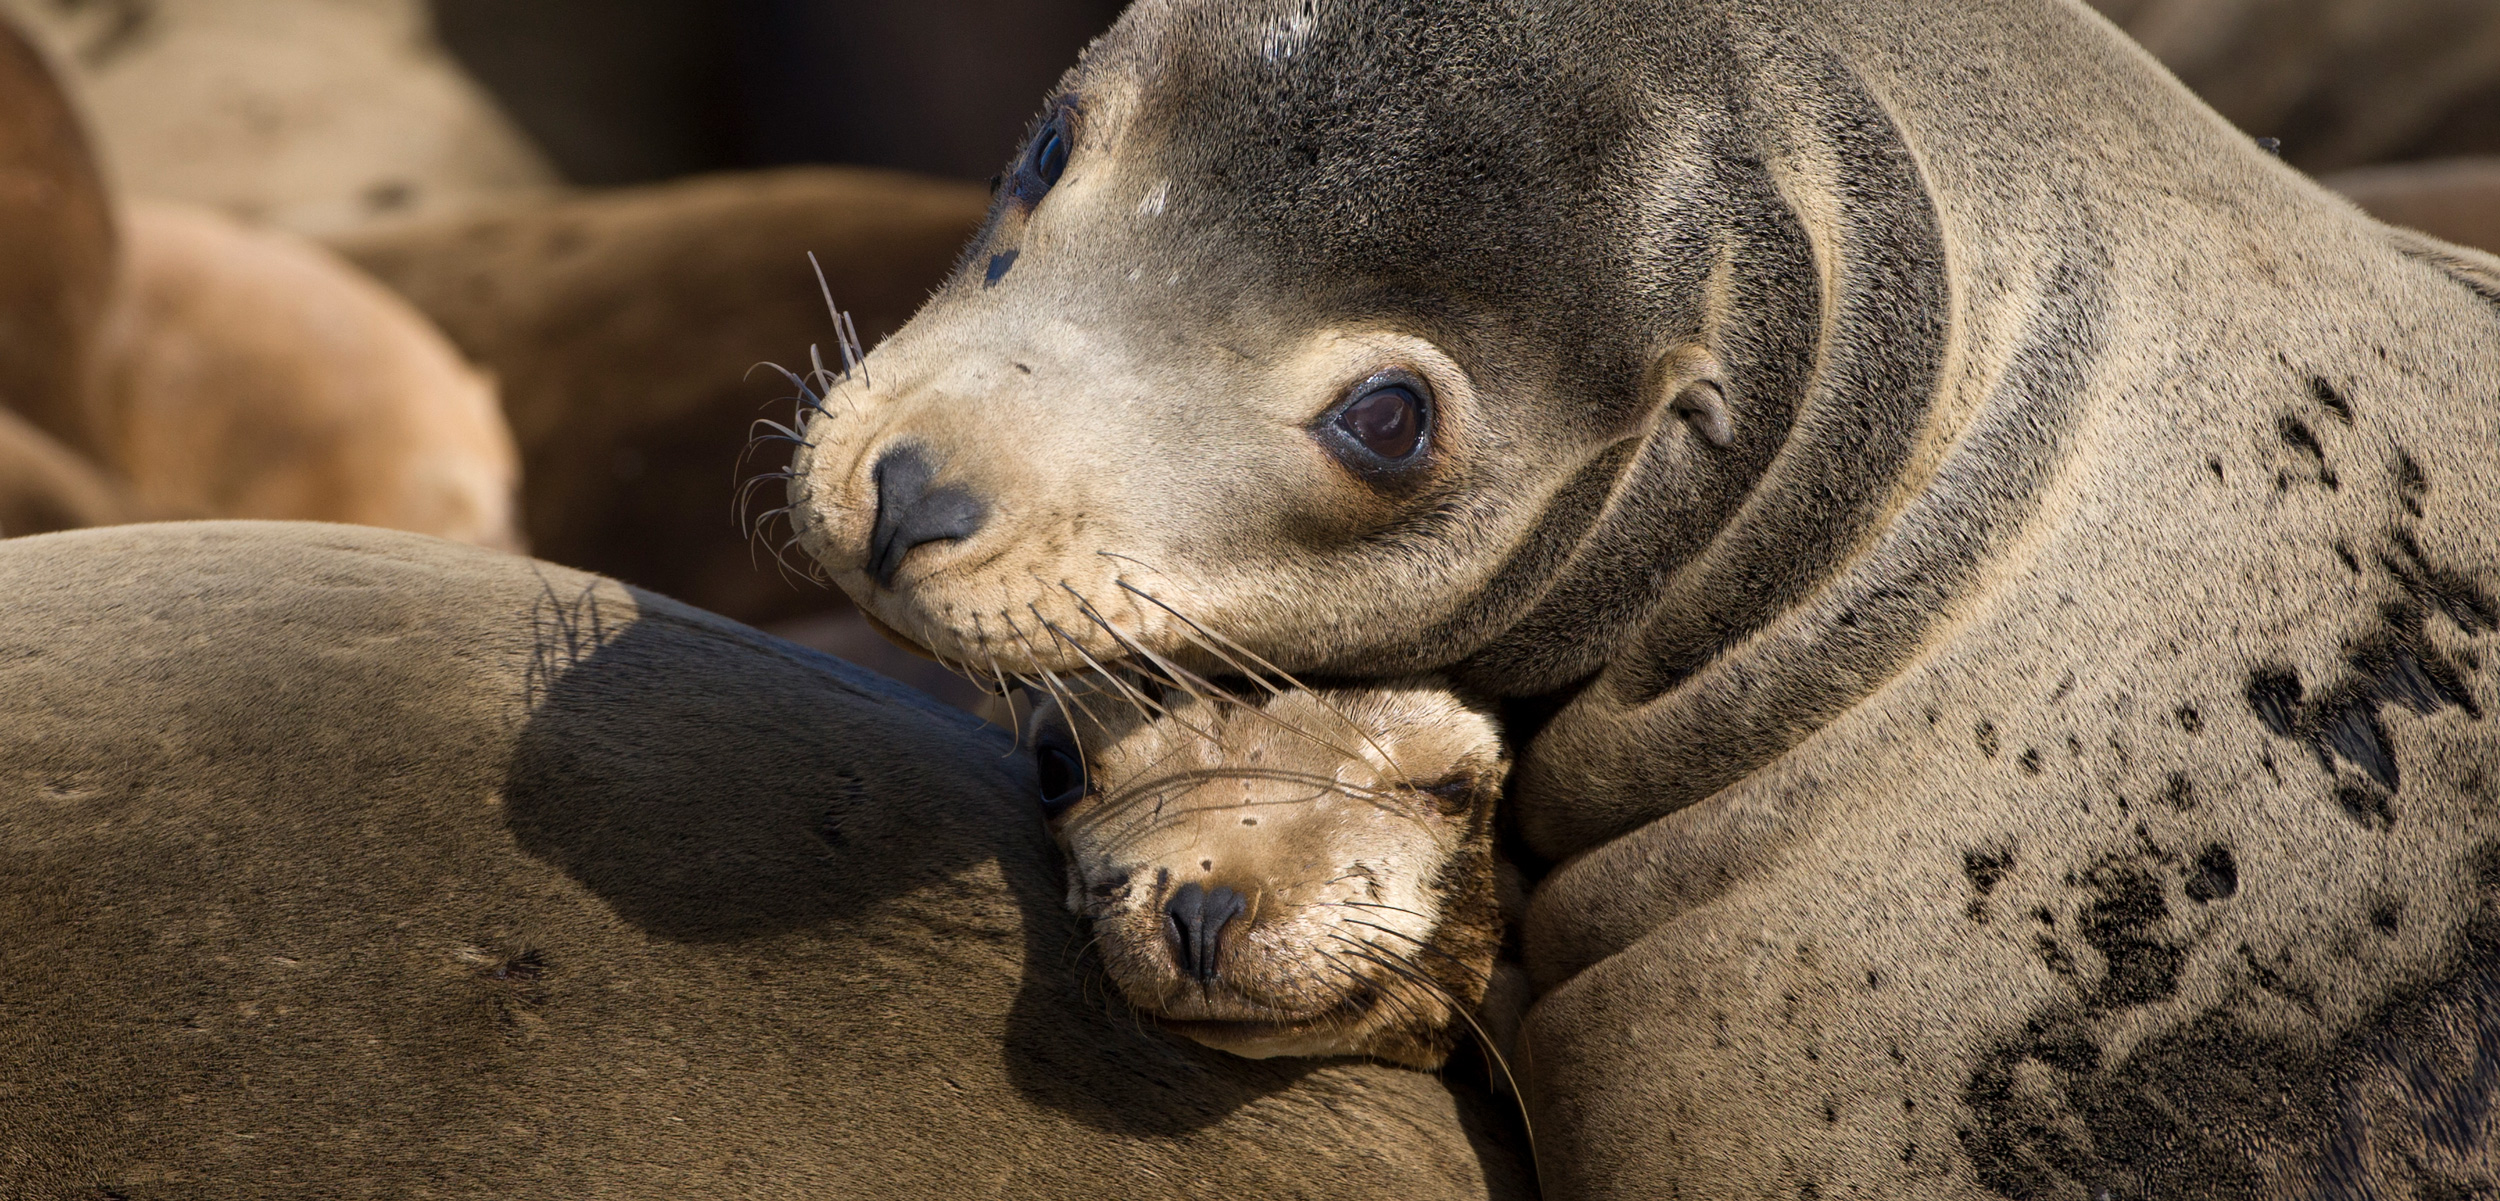 Three years of abnormally warm water in the North Pacific had a huge effect on sea lions and other species. Photo by Suzi Eszterhas/Minden Pictures